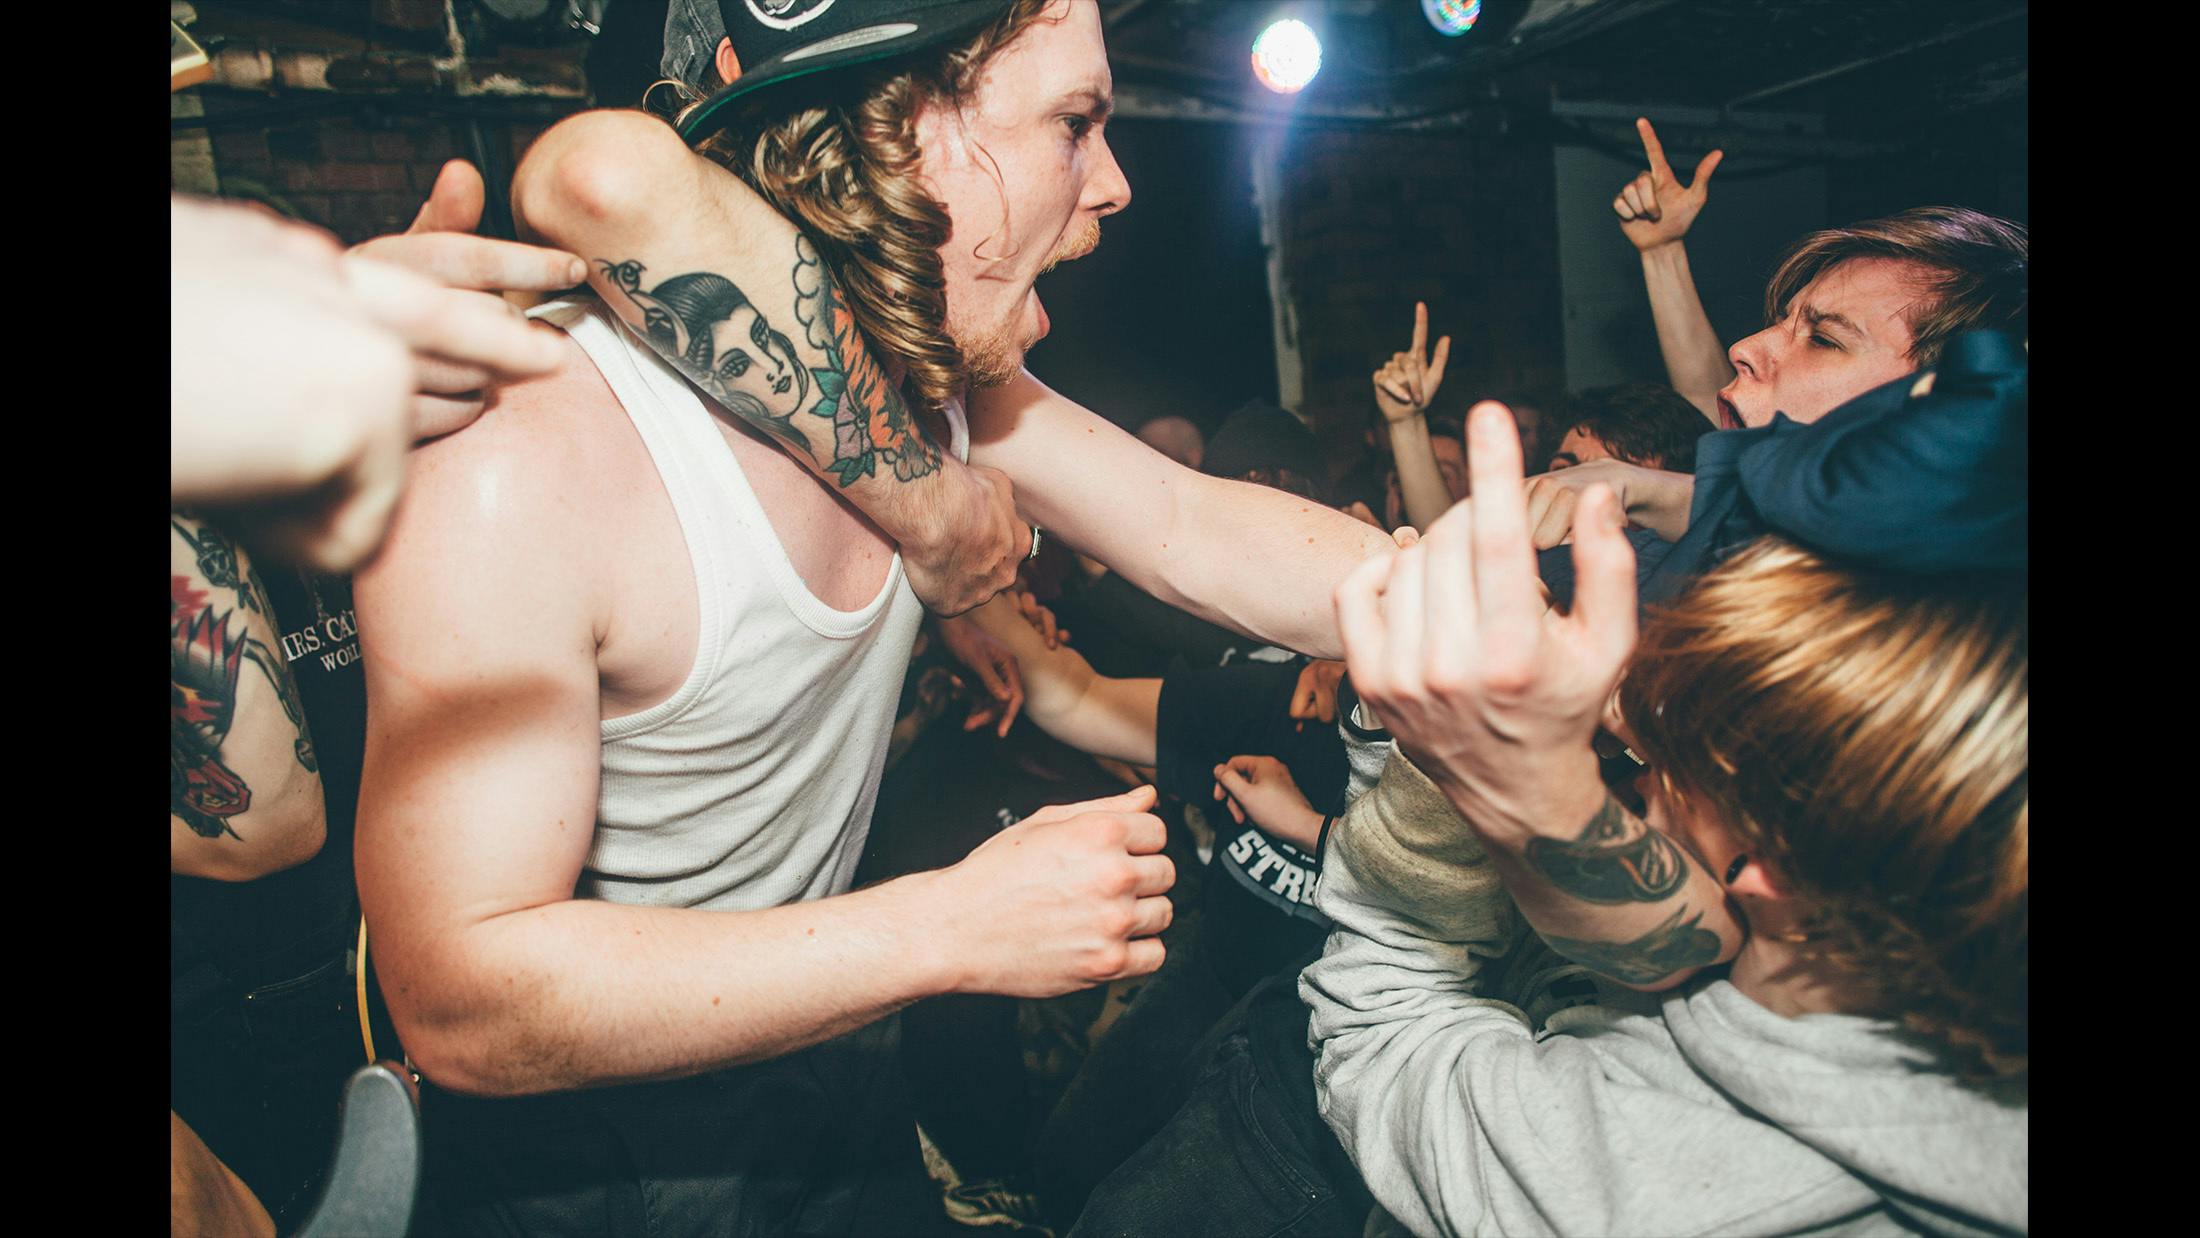 Broken Teeth at Snugglefest in 2015. Snugglefest is another Hardcore fest that happens in Leeds, on New Years Eve since 2014. It’s always a sick sell out show with a full UK band line up.